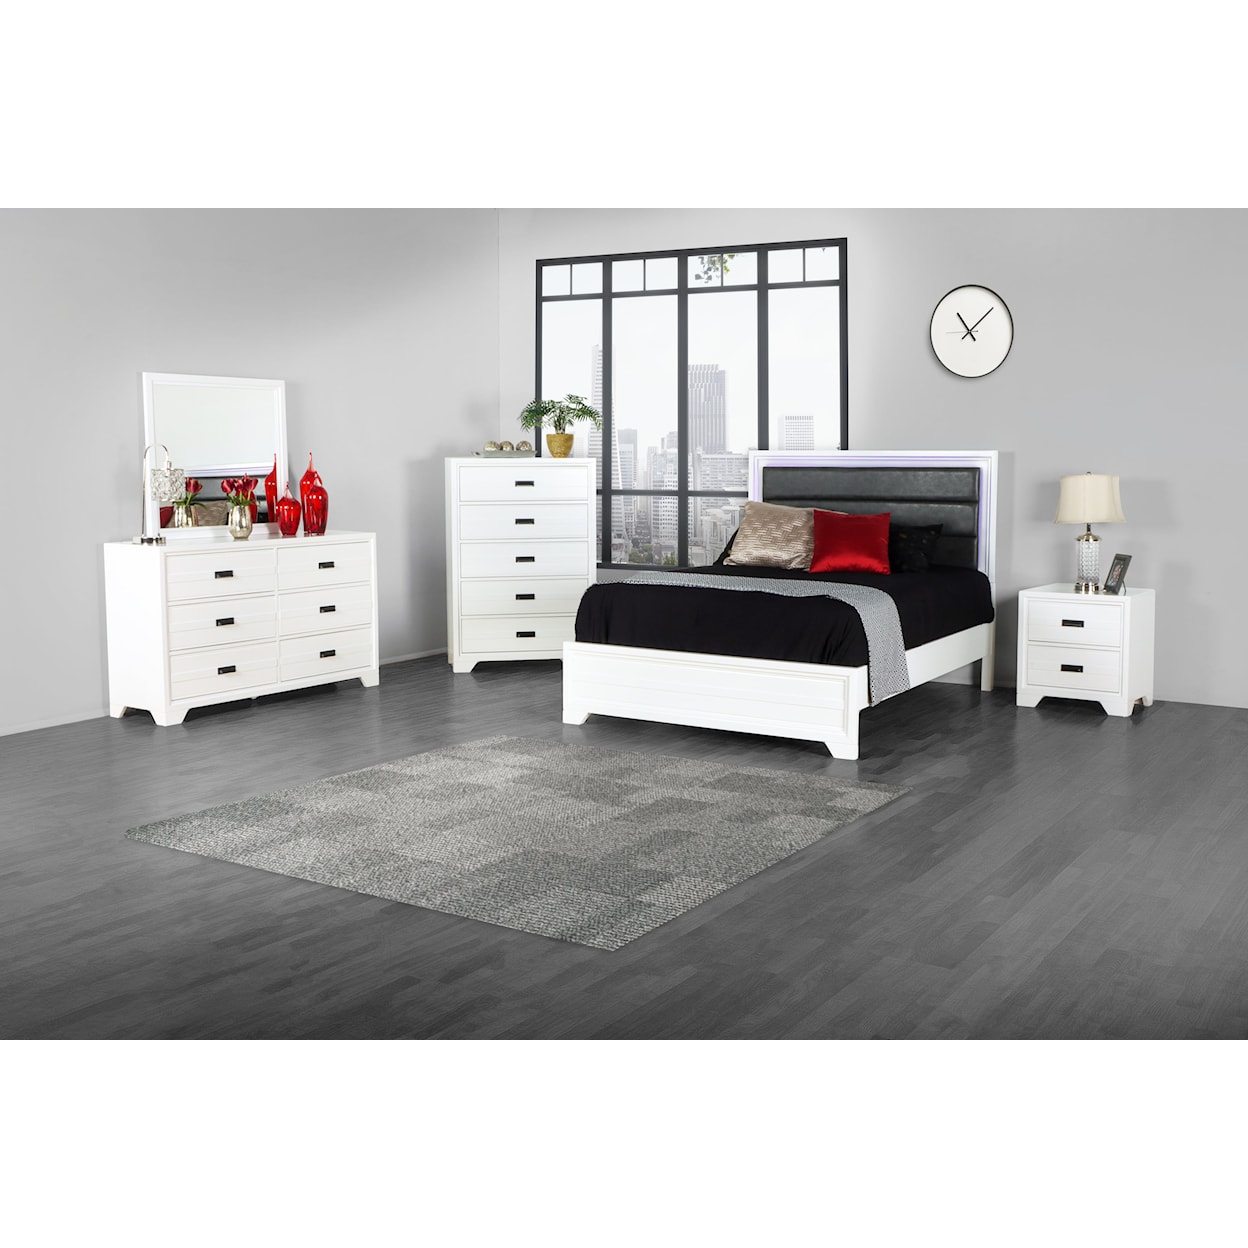 New Classic Furniture Halo King Bedroom Group